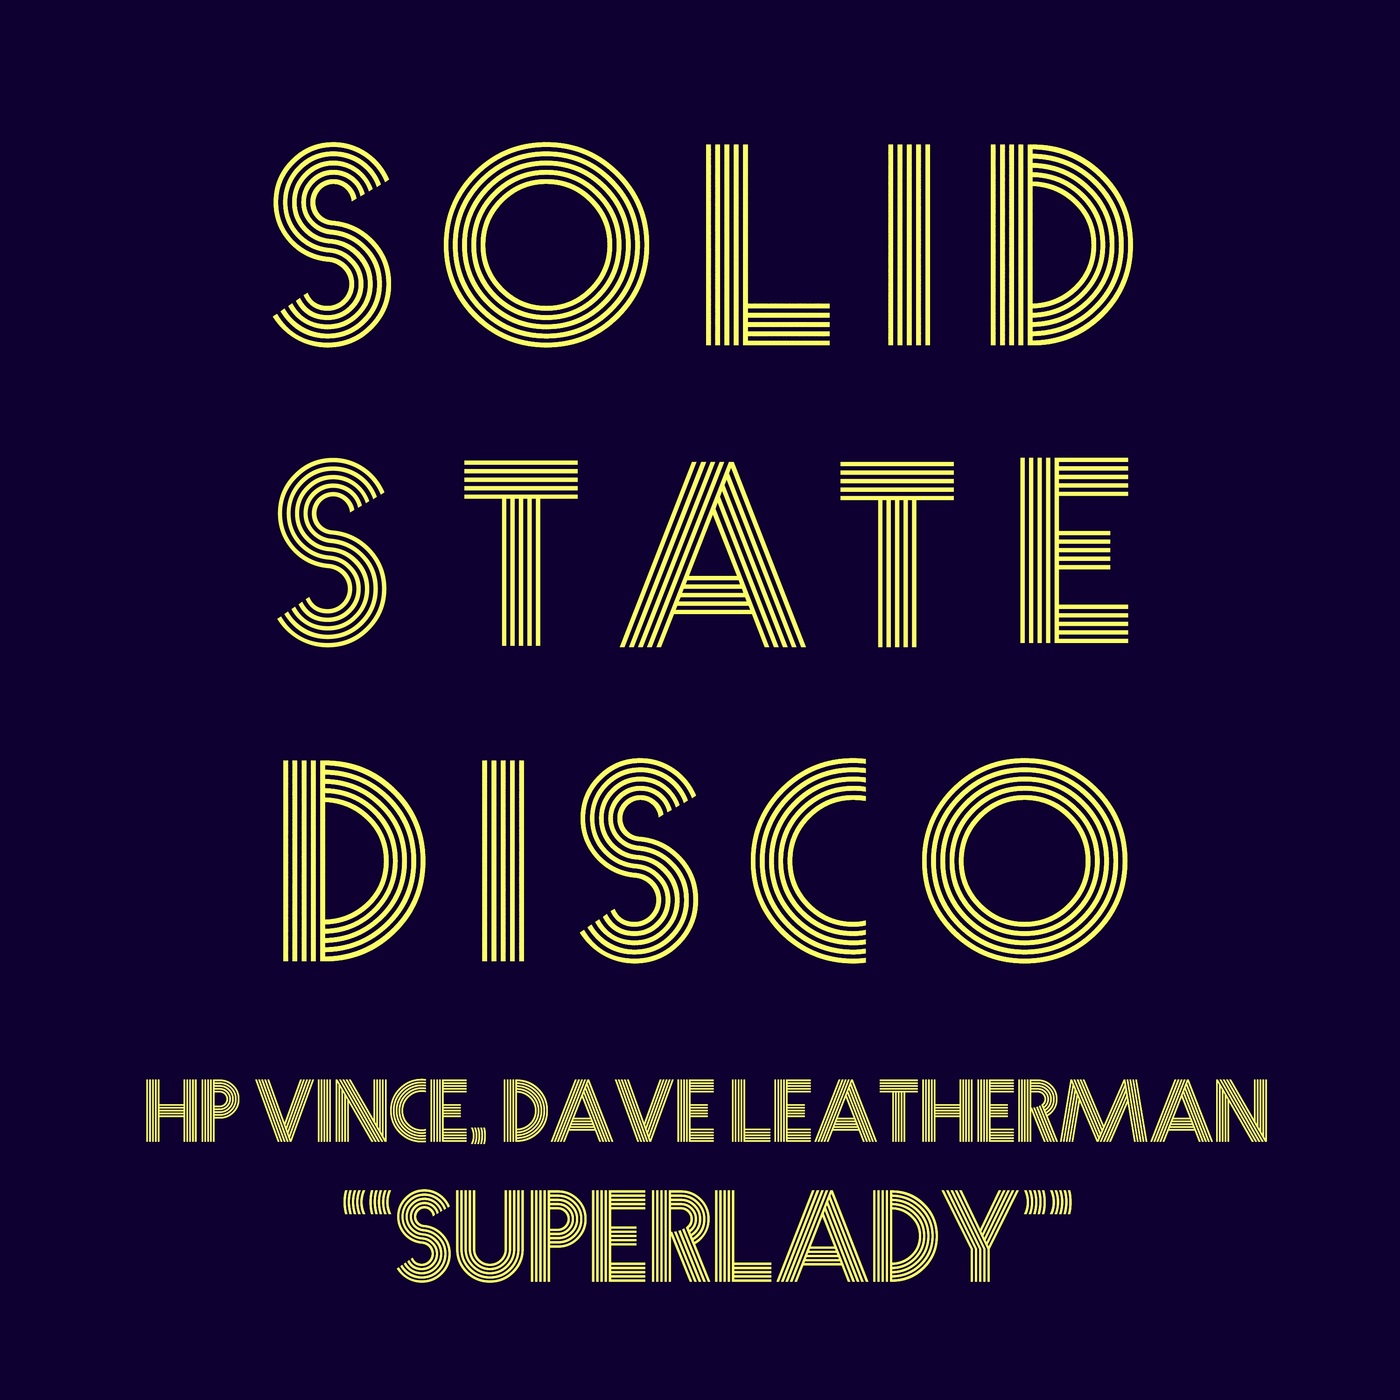 HP Vince & Dave Leatherman - Superlady / Solid State Disco